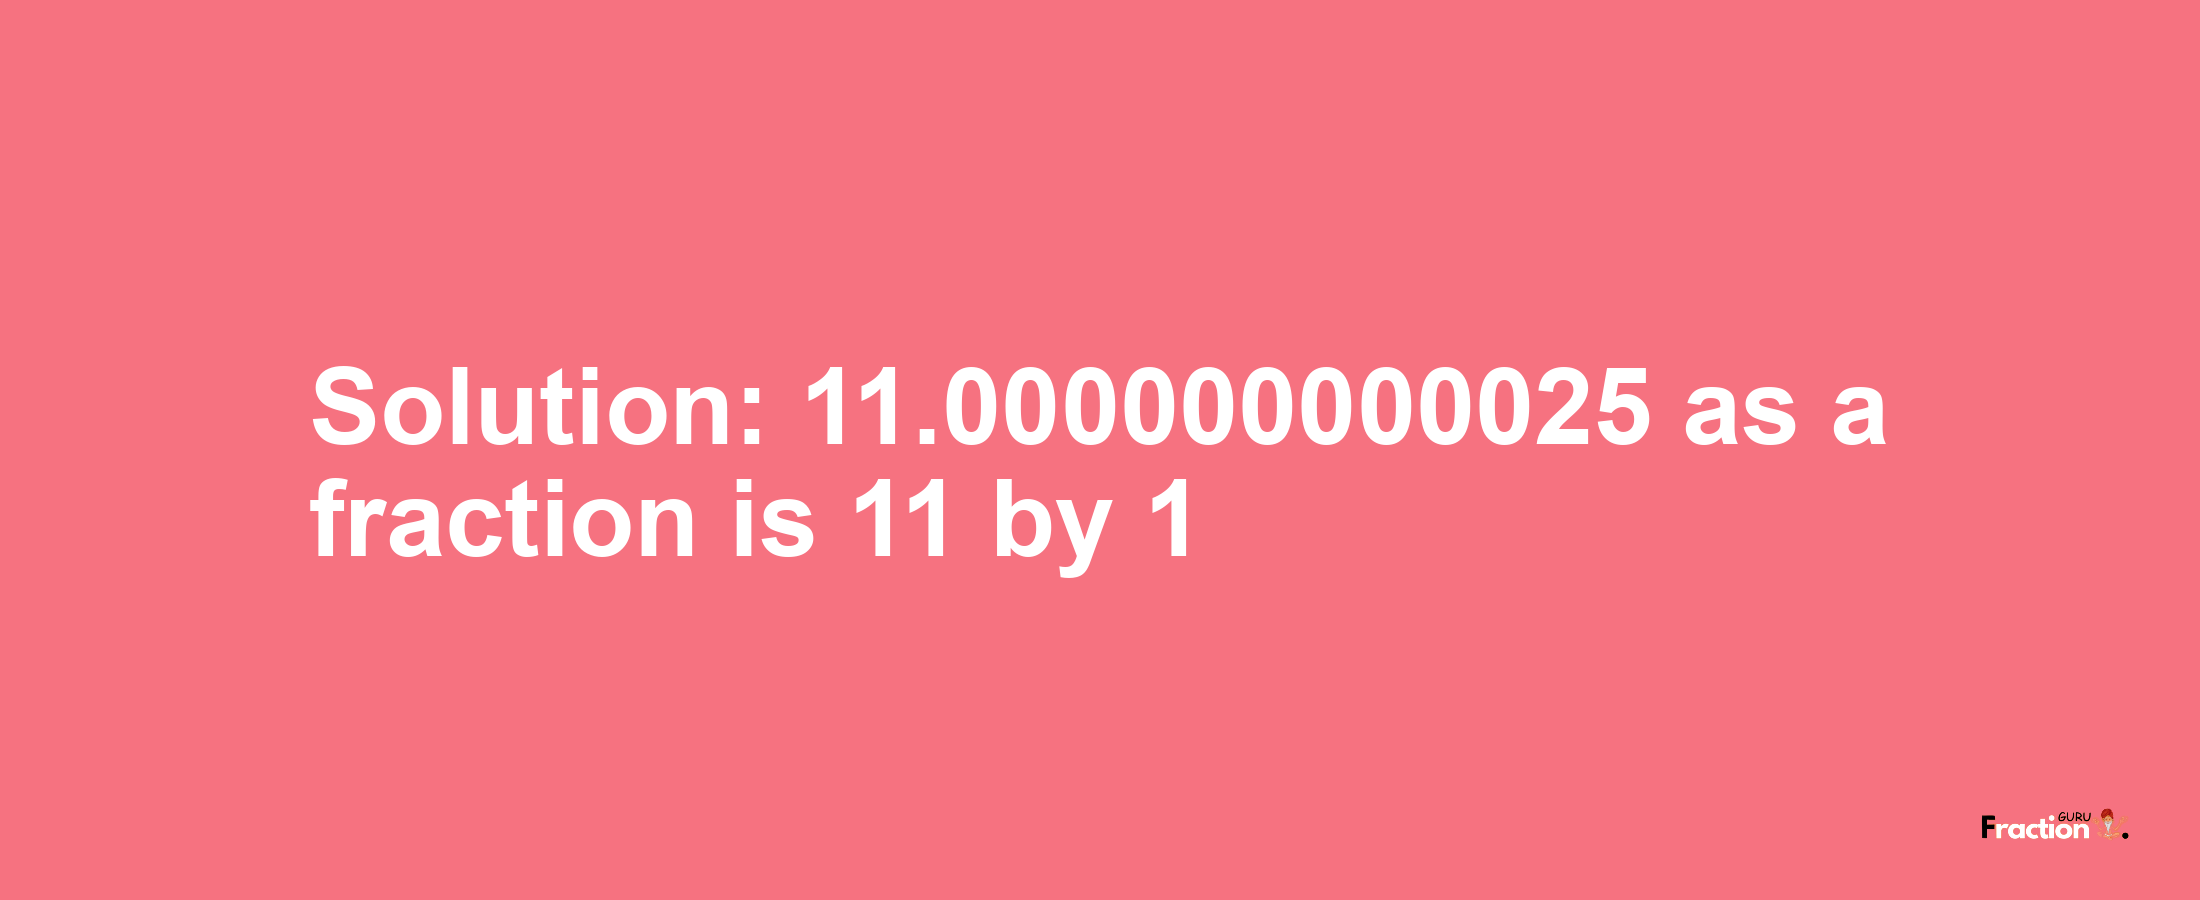 Solution:11.000000000025 as a fraction is 11/1